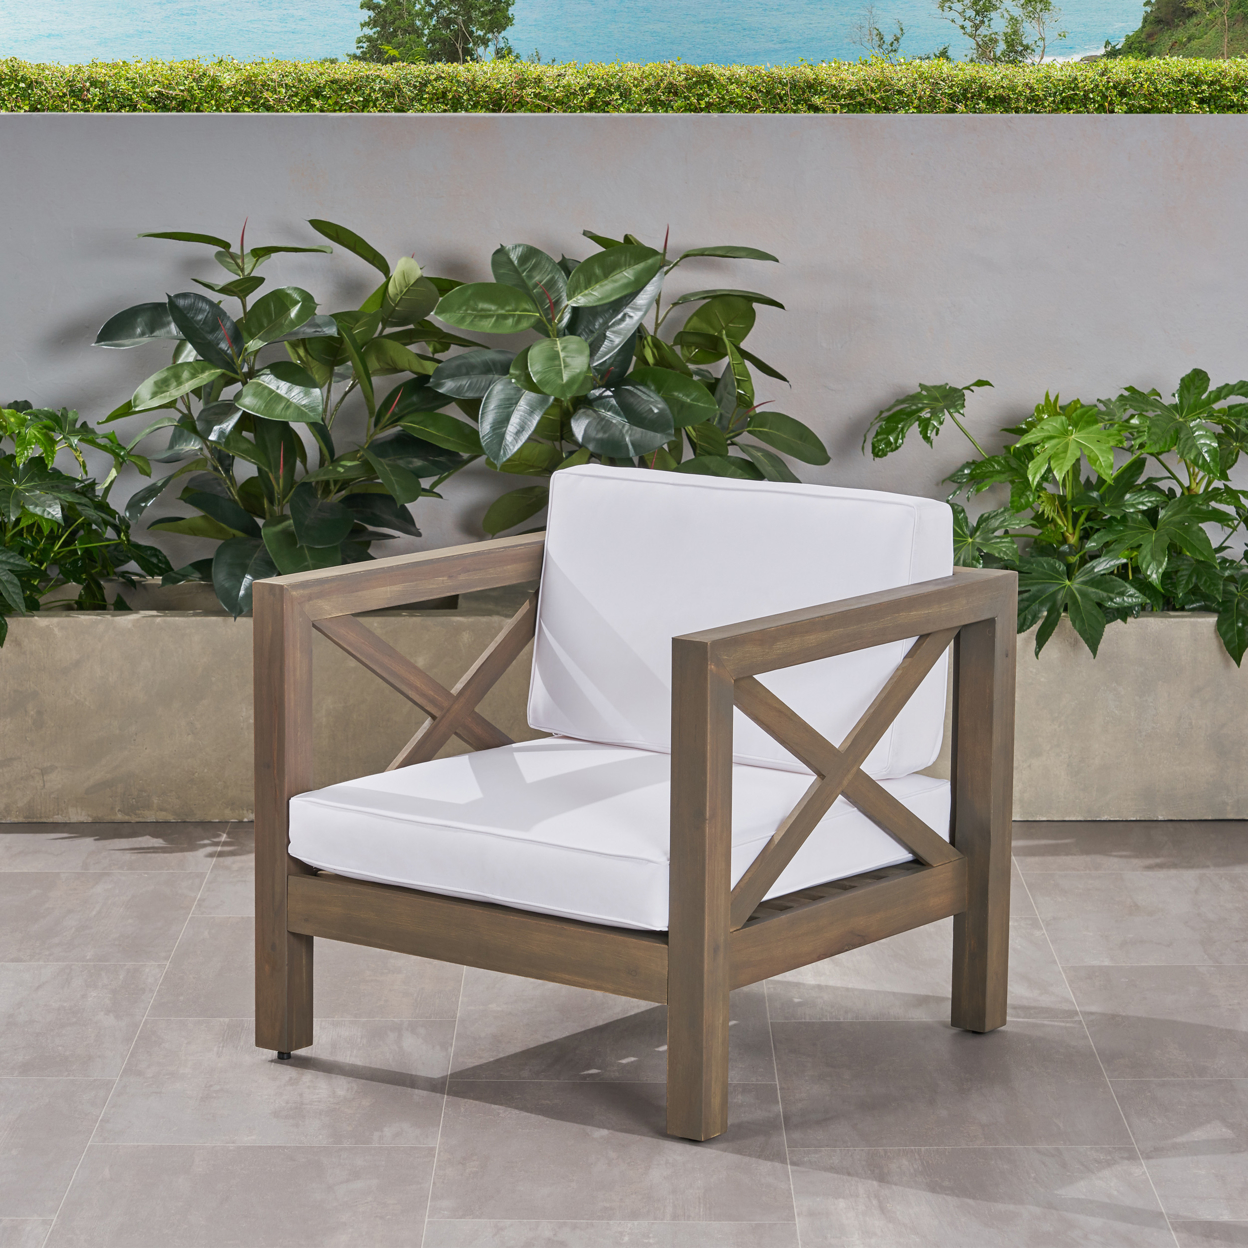 Indira Outdoor Acacia Wood Club Chair With Cushion - Gray Finish + White